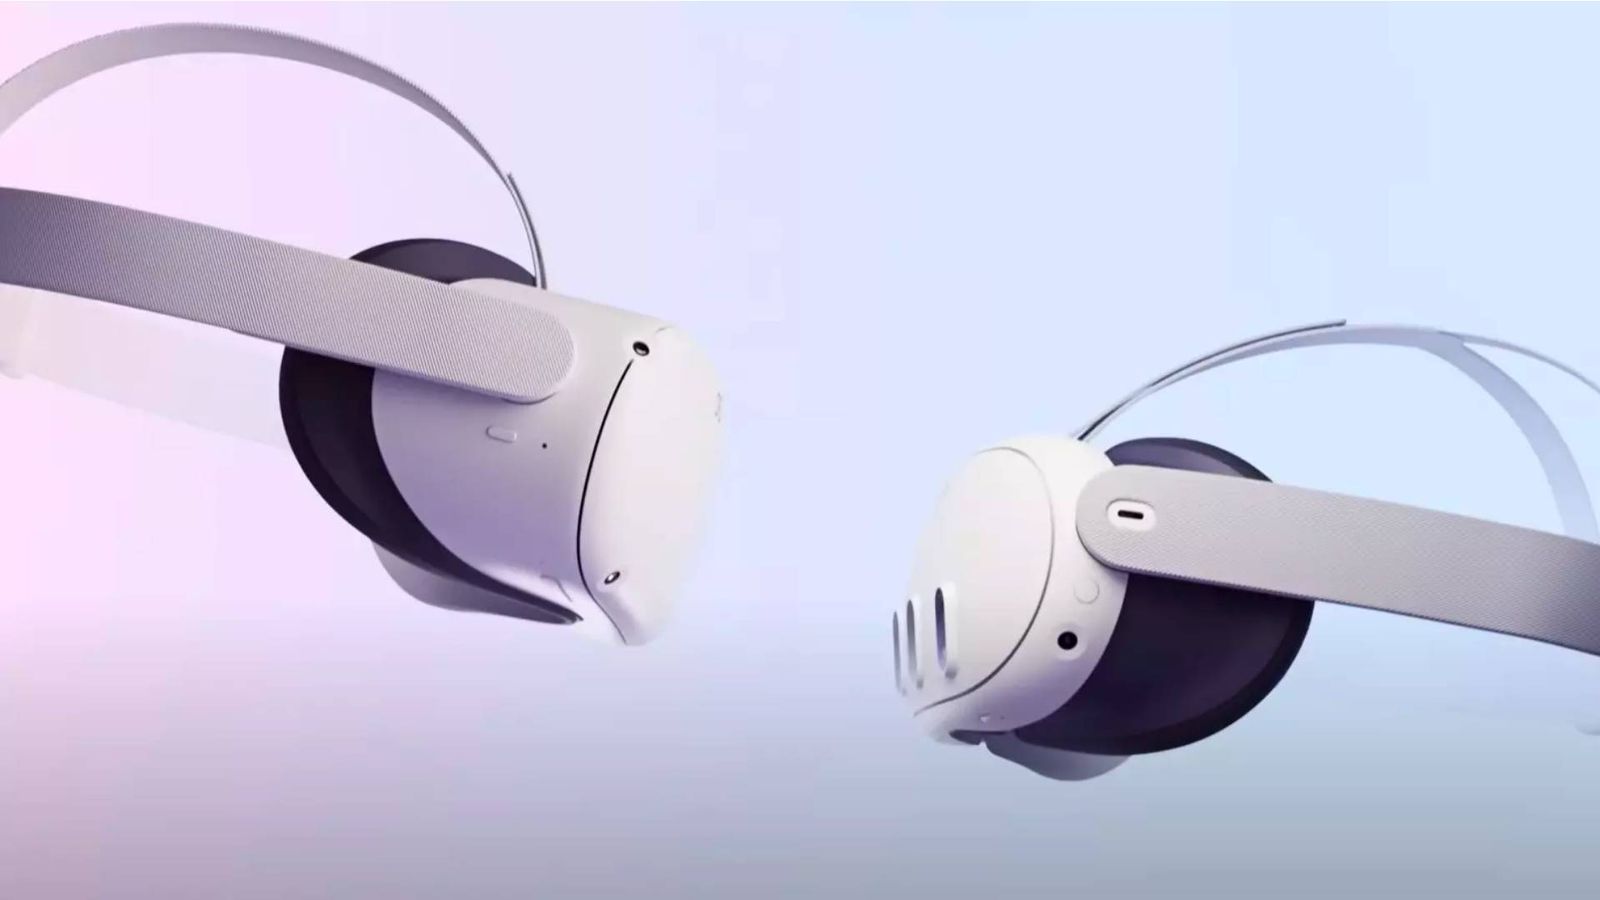 Meta Quest 2 vs Quest 3 - An image of the Quest 2 and Quest 3 headset side by side